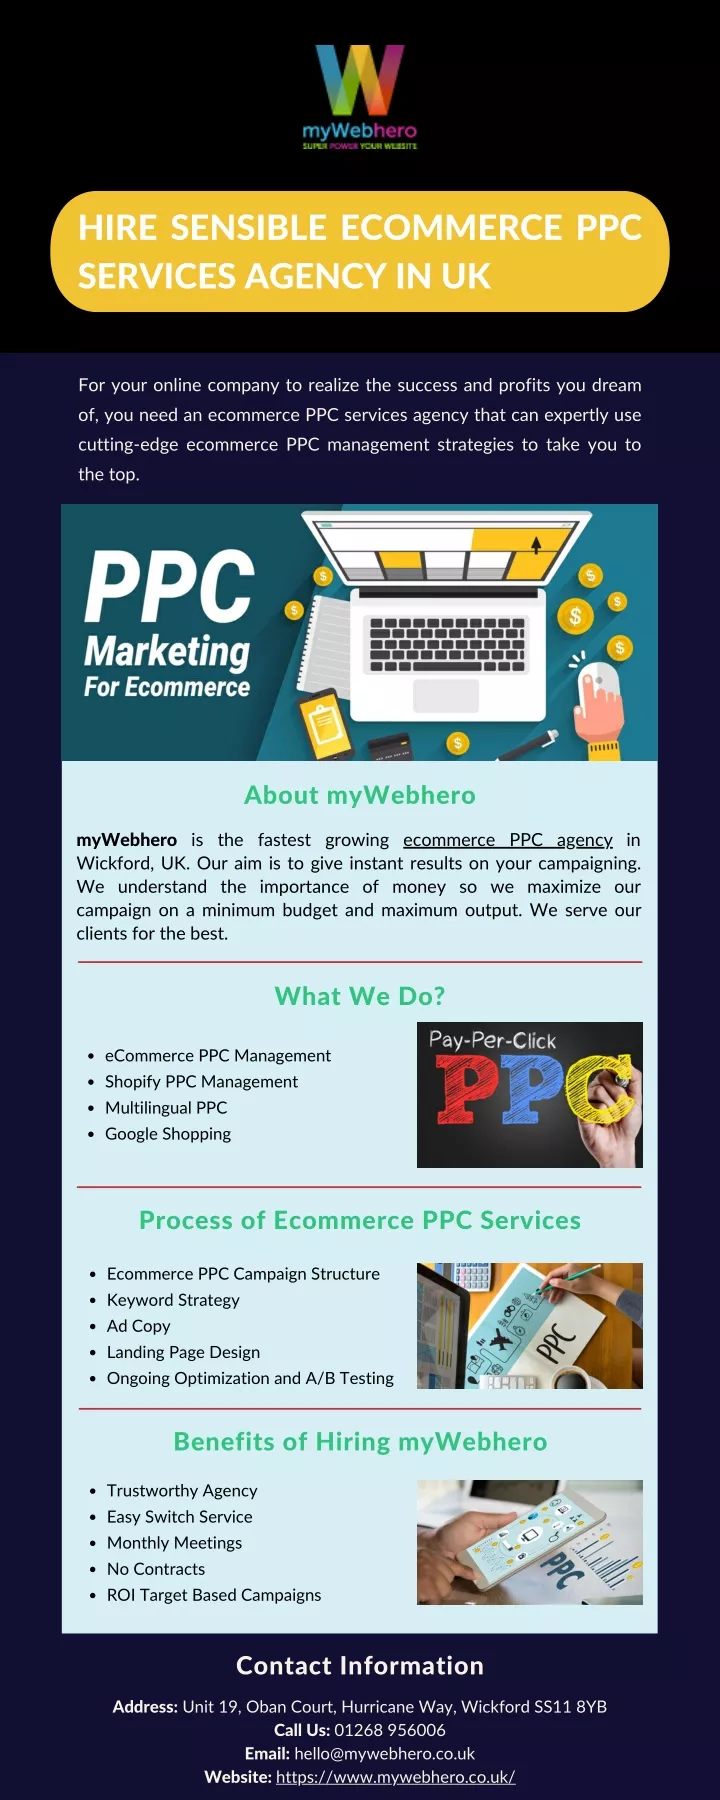 hire sensible ecommerce ppc services agency in uk